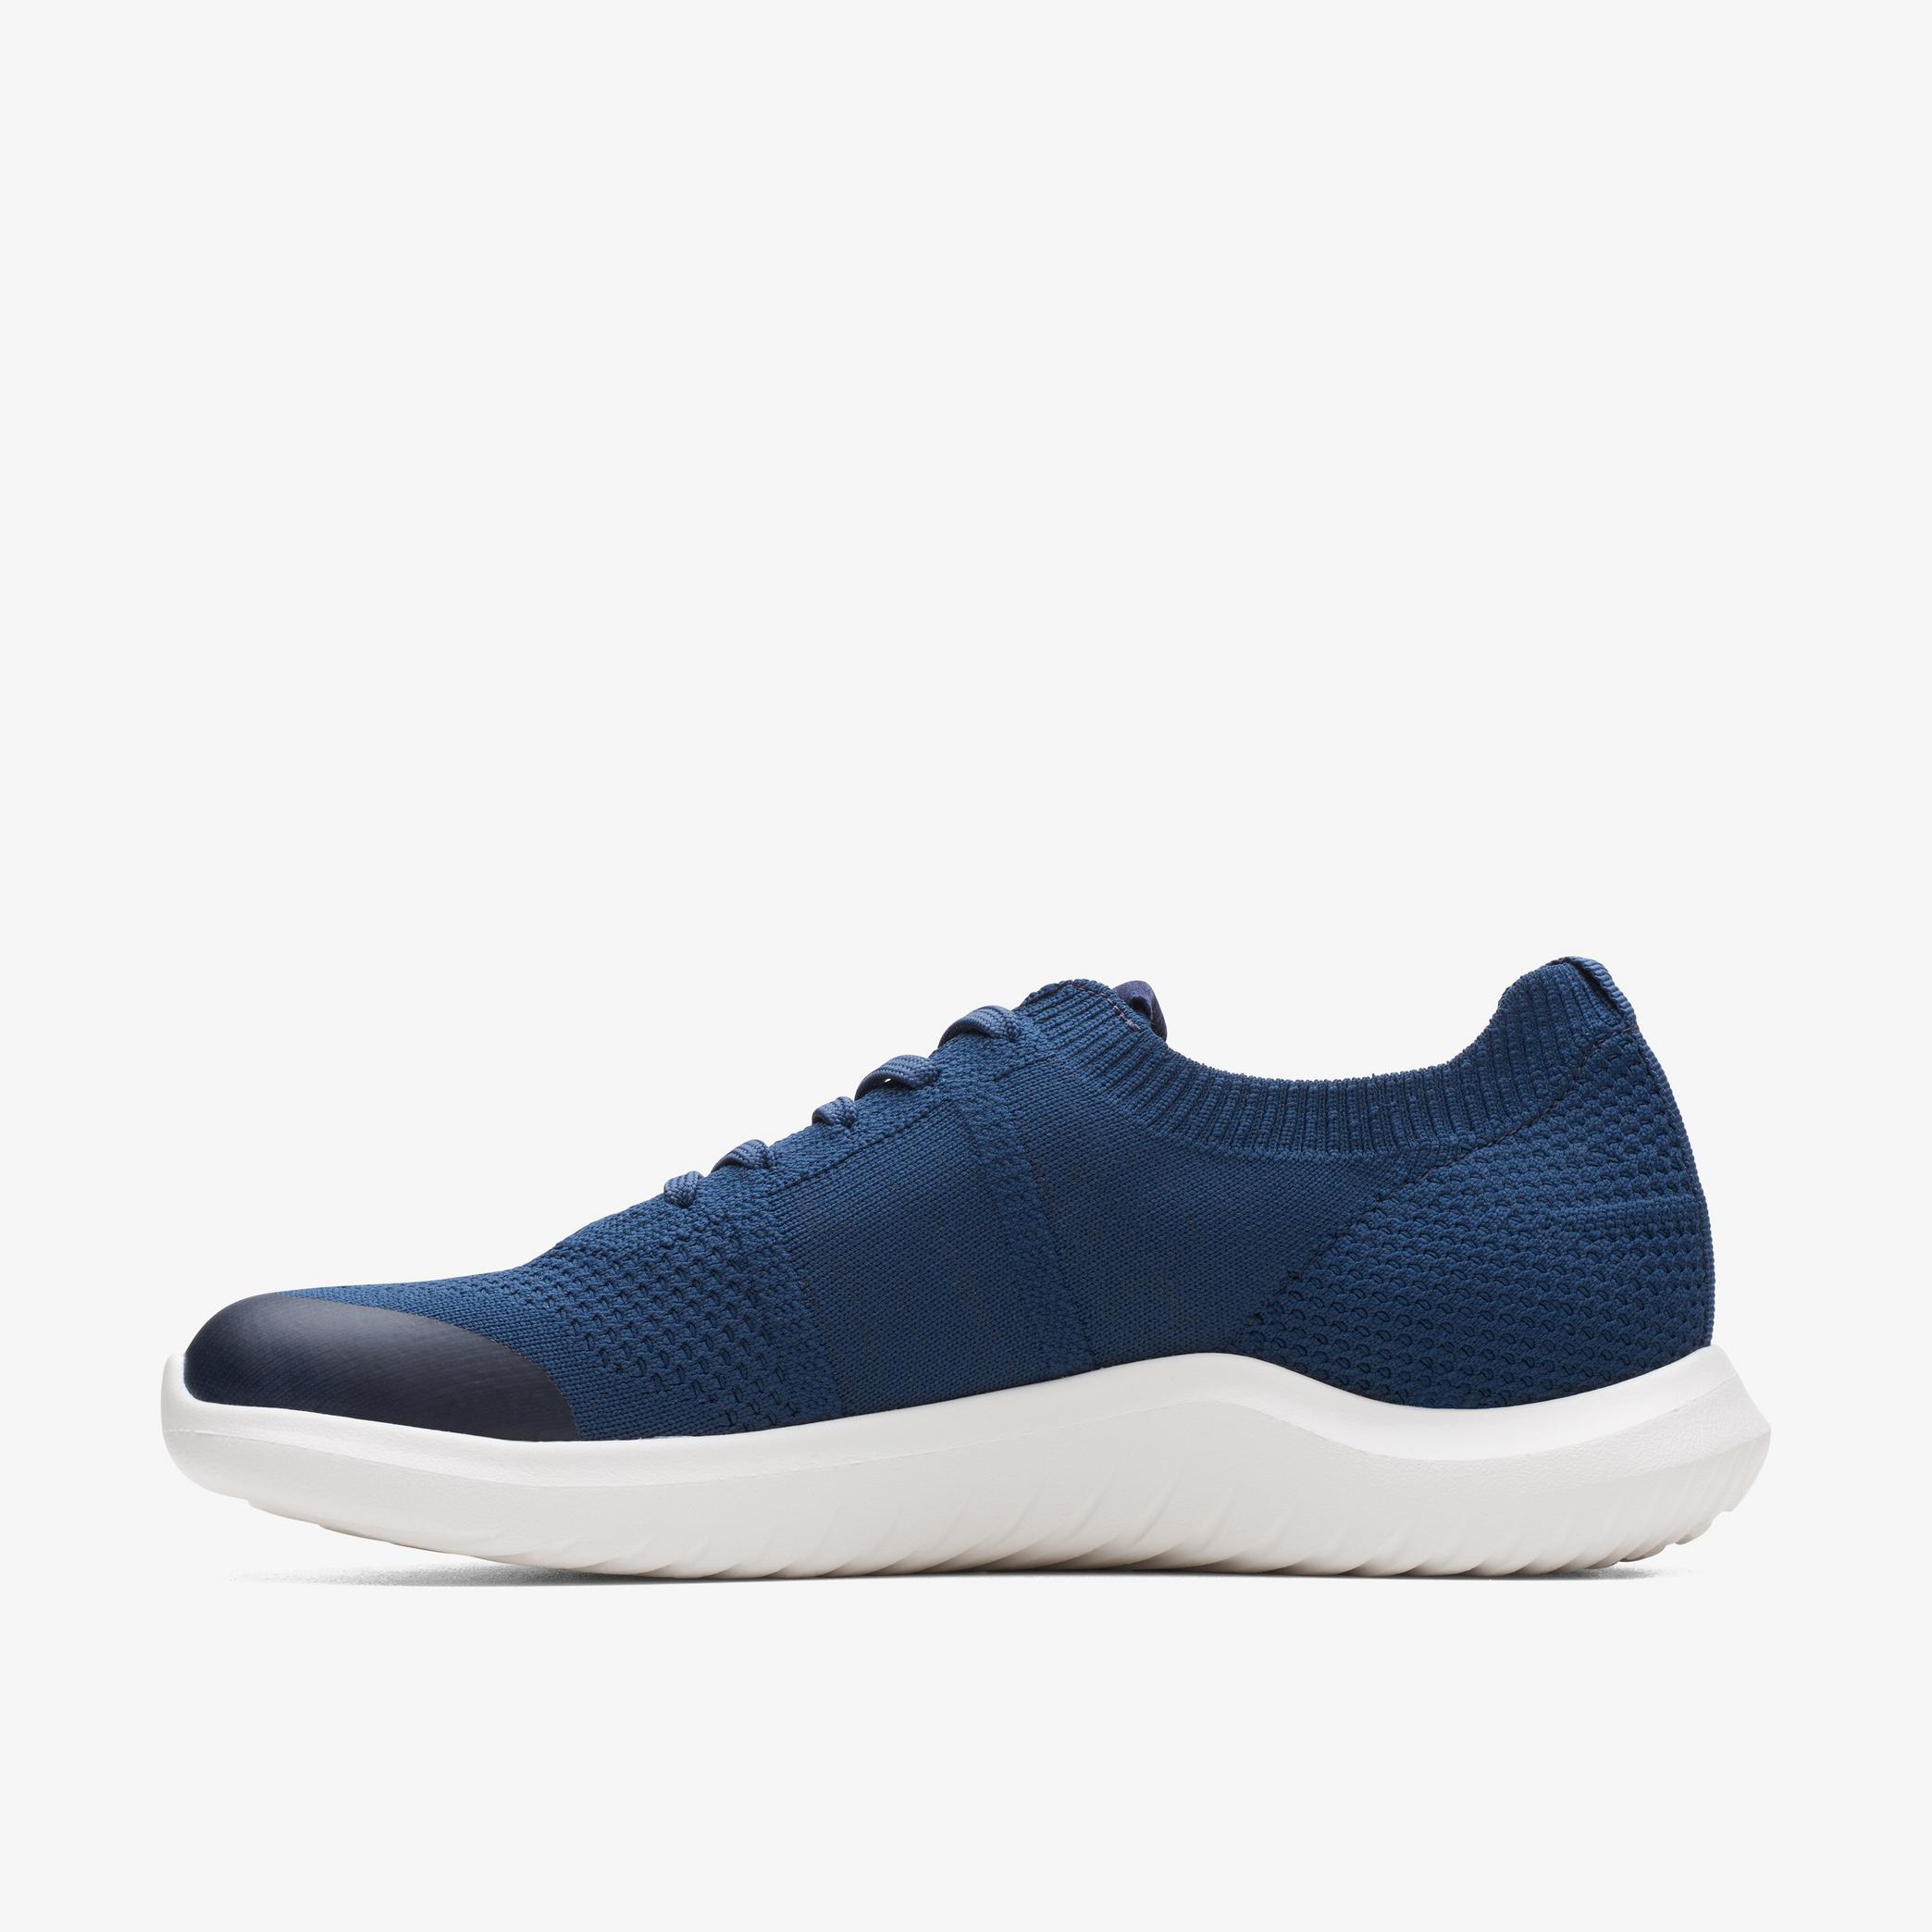 Womens NovaLite Lace Navy Knit Shoes | Clarks Outlet